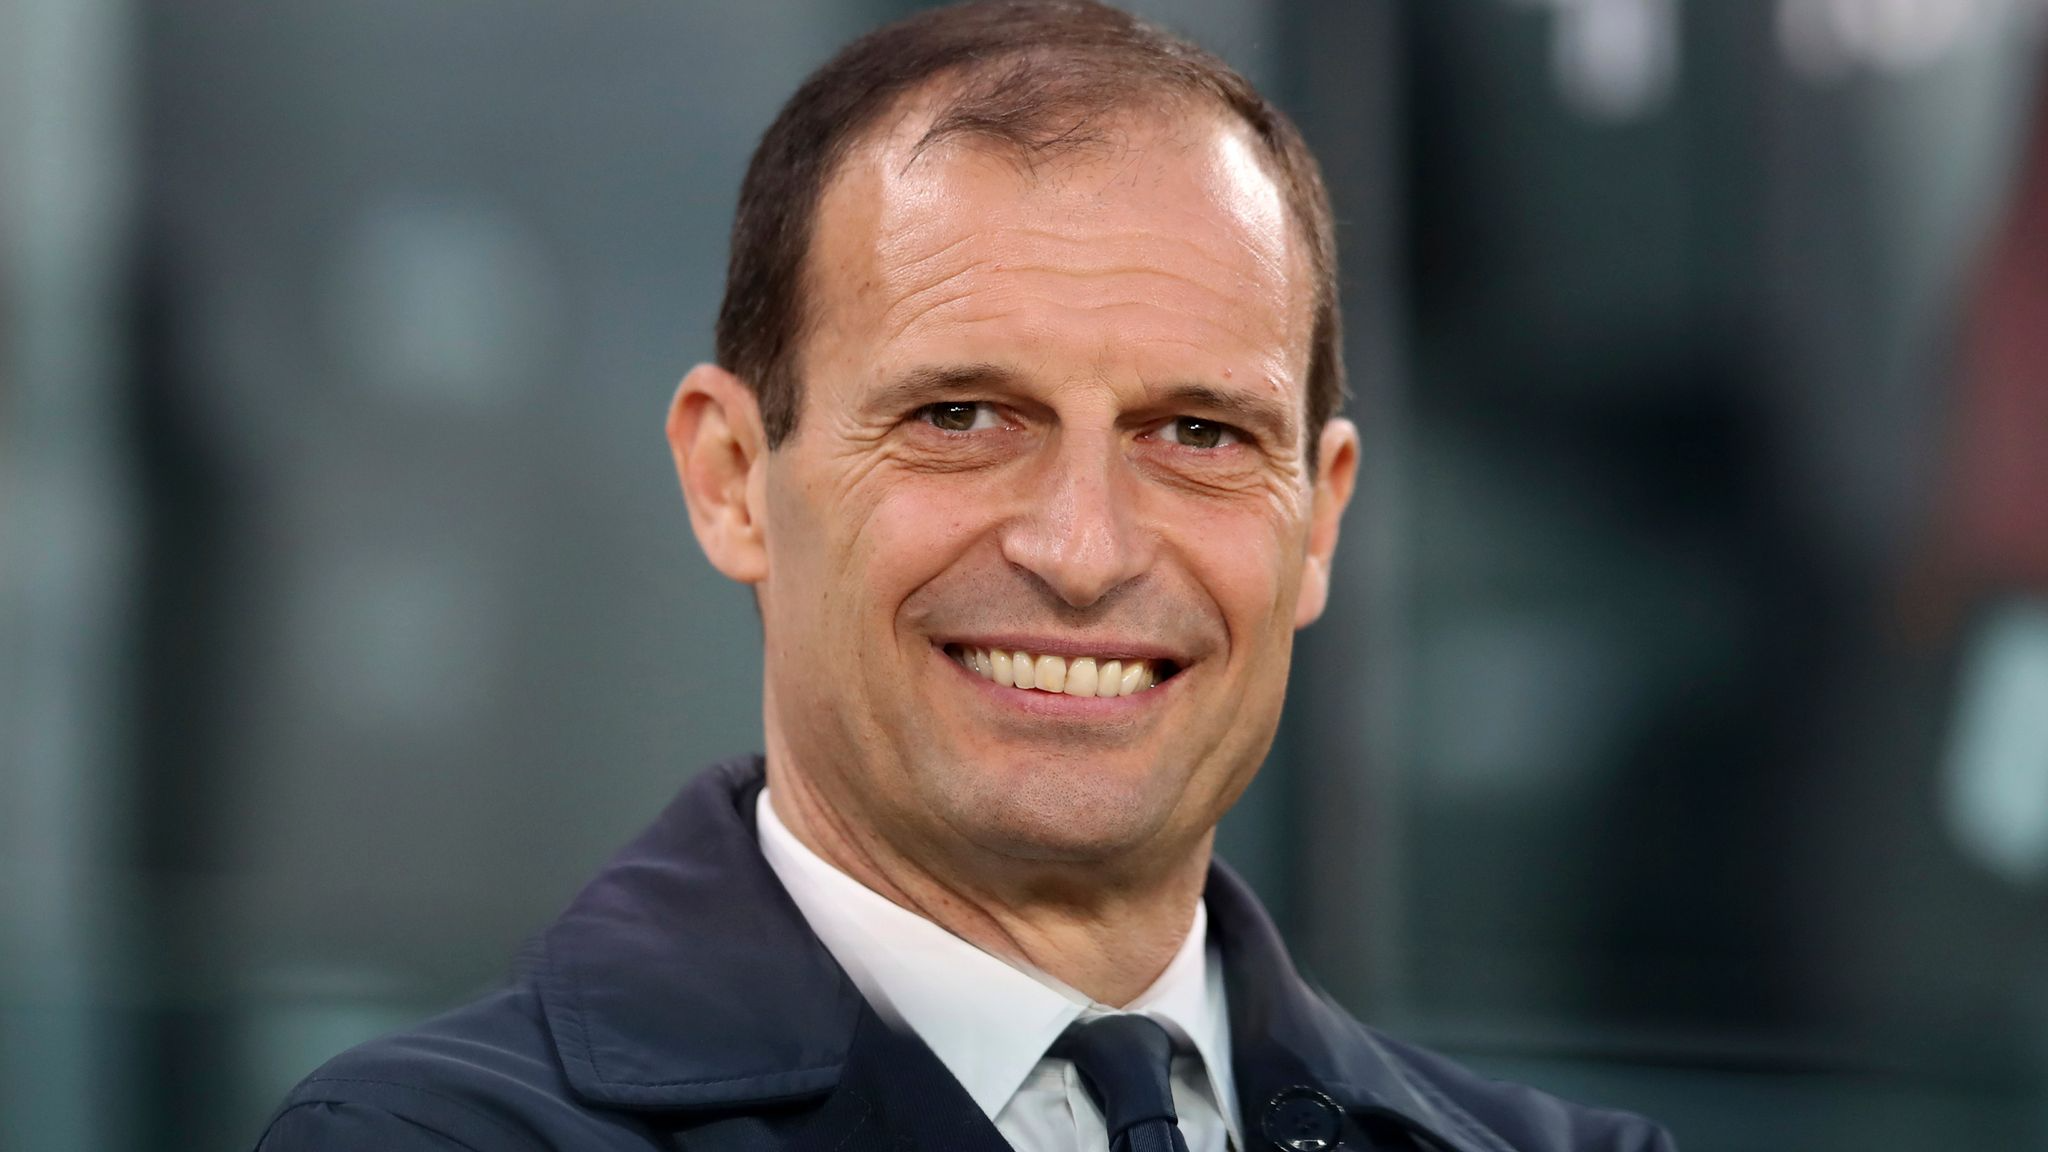 Allegri calls not to look for excuses after Juventus docked ten points in Serie A